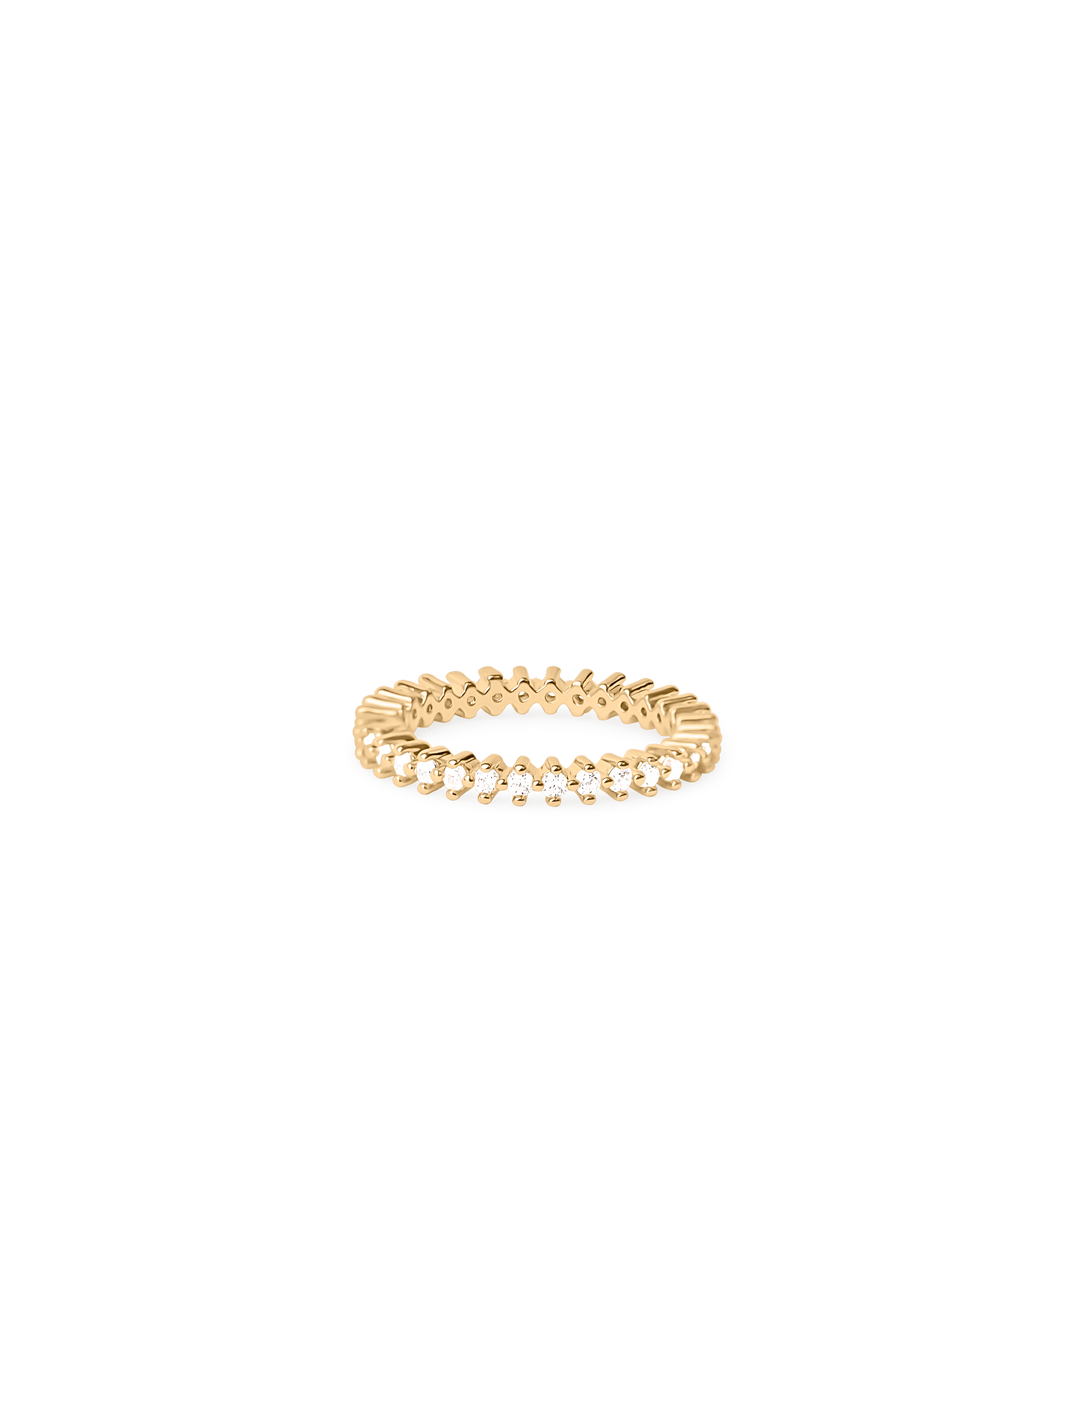 Zirconia Ring by Janni Delér 18k gold plated brass